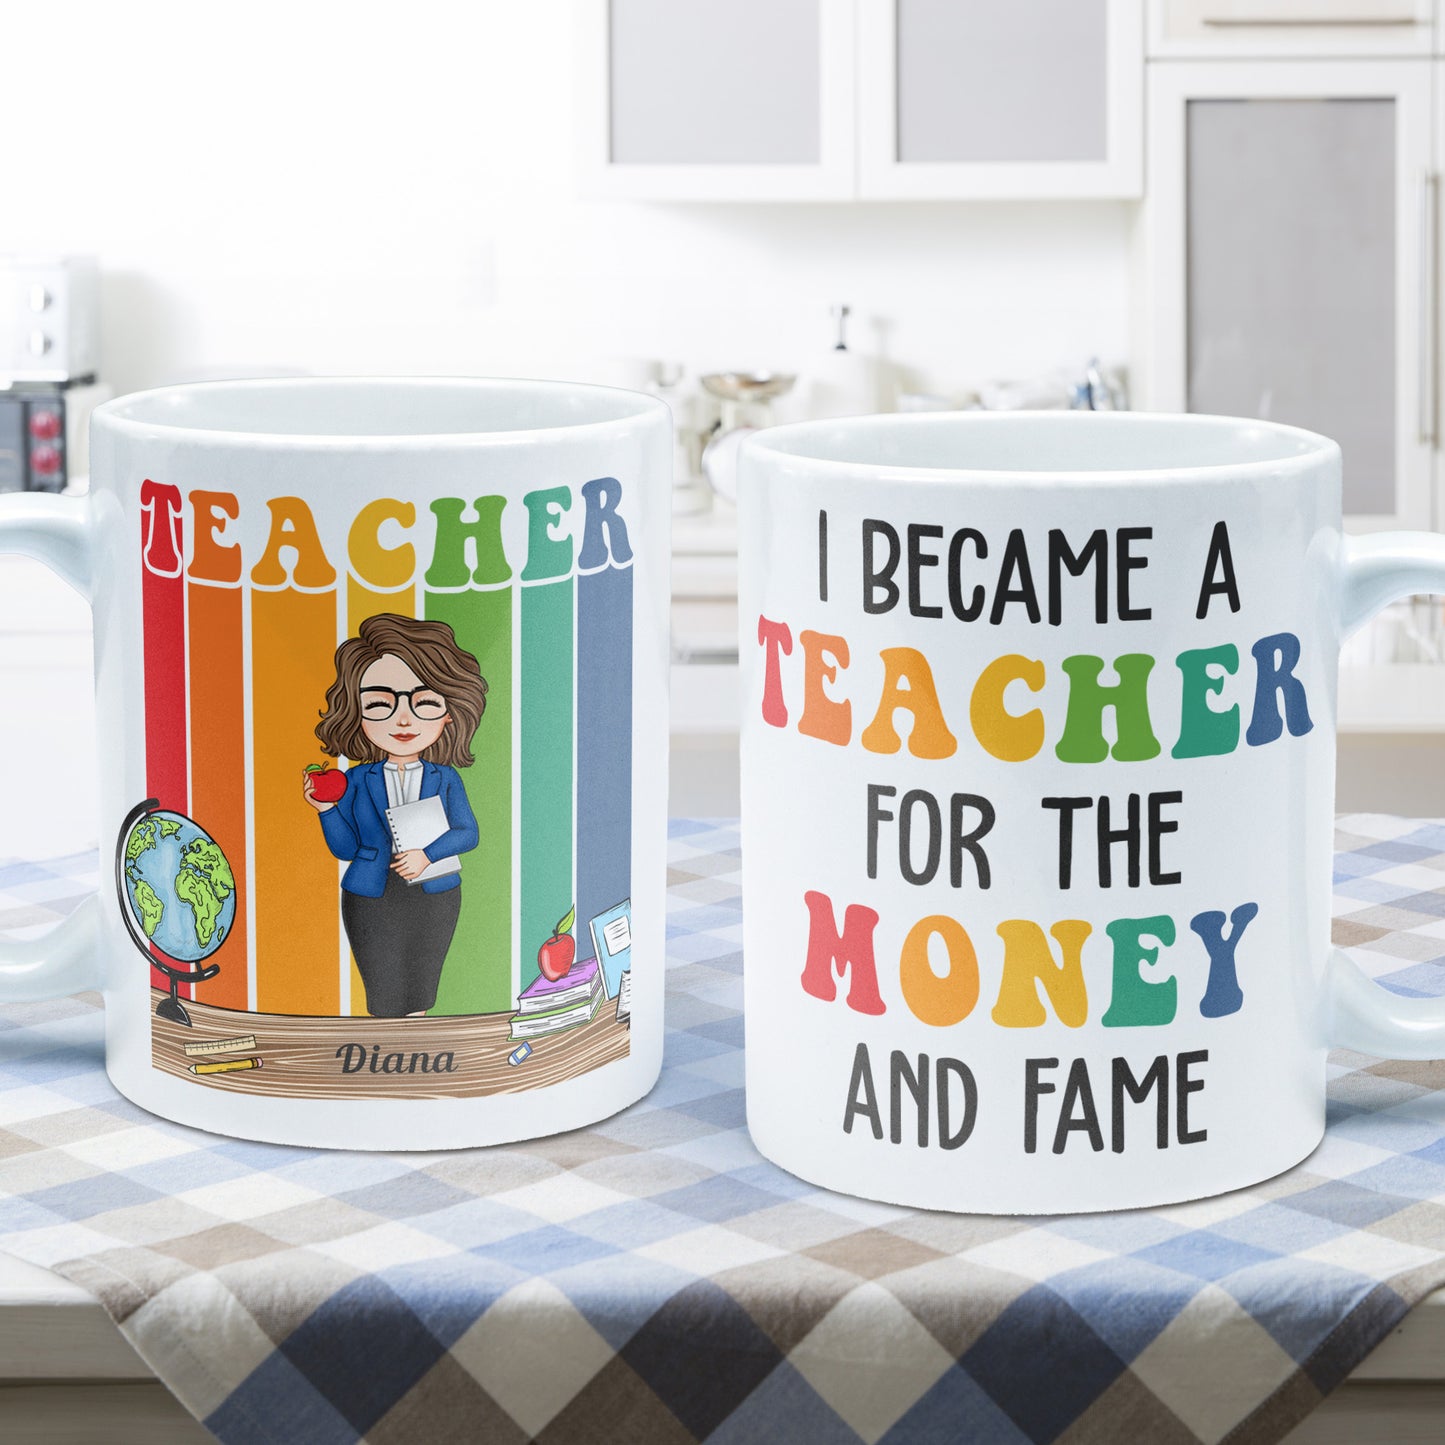 Funny I Became A Teacher For The Money And Fame - Personalized Mug